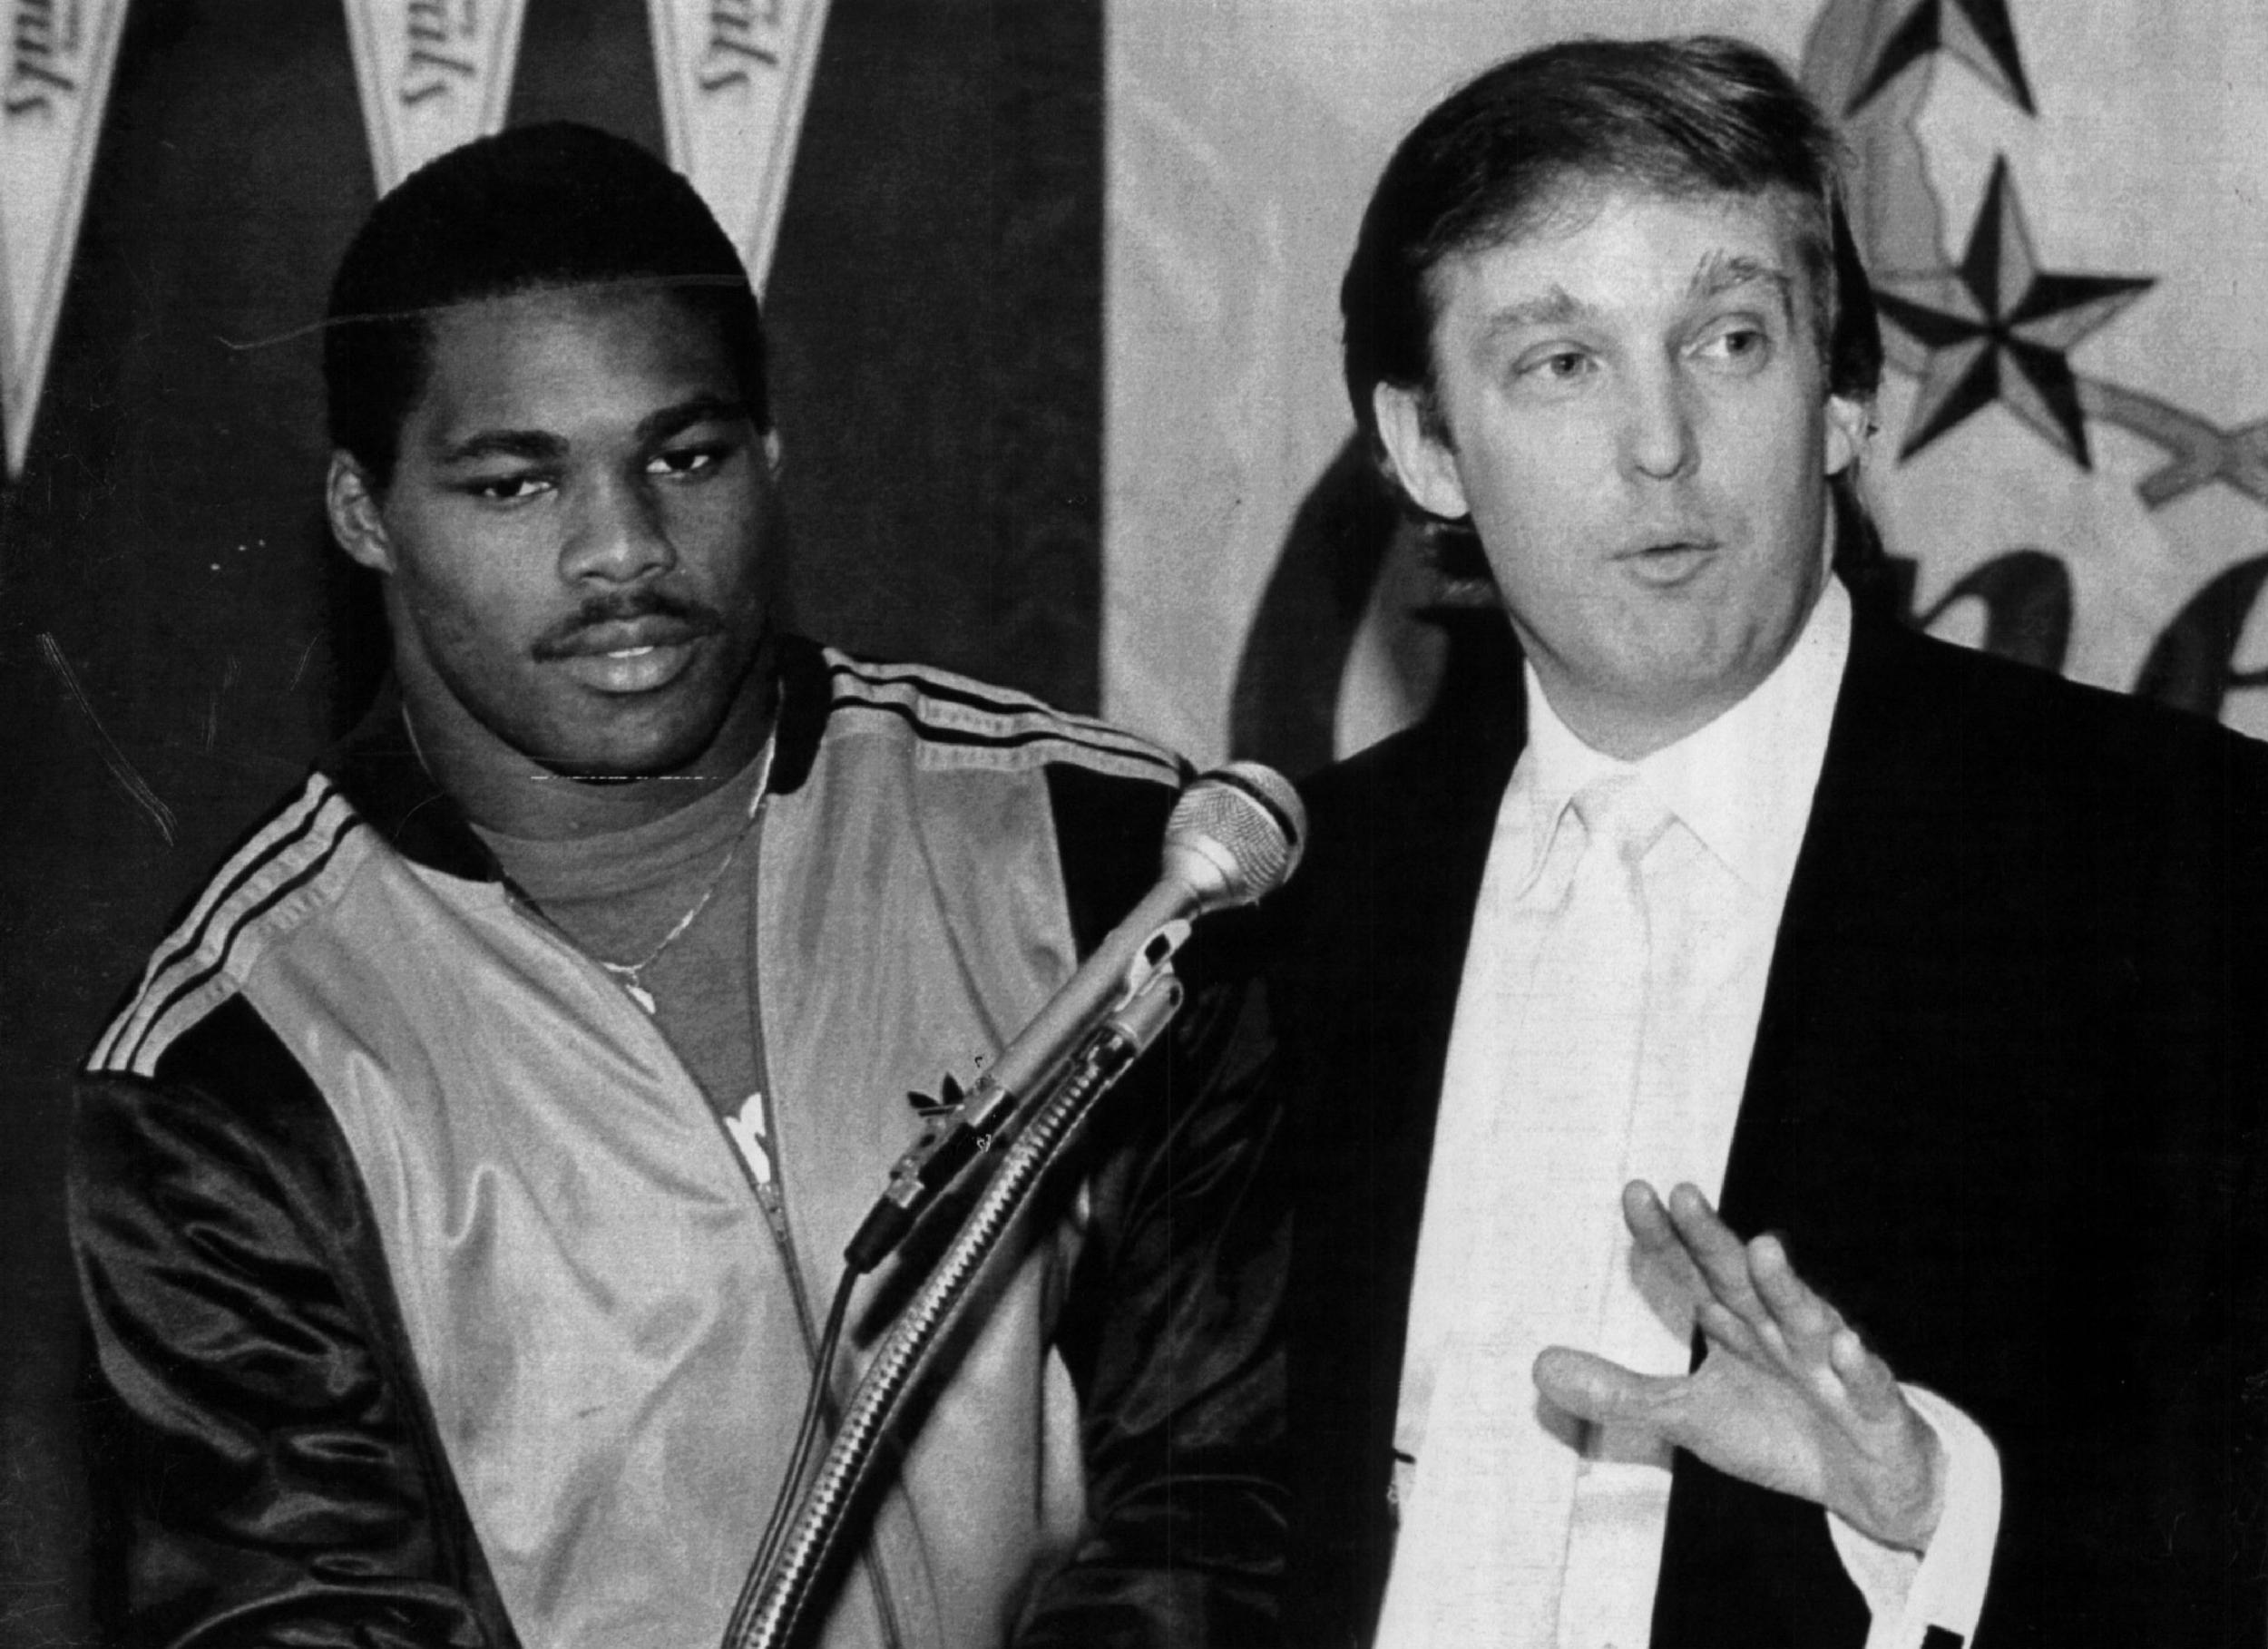 Donald Trump announces a signing during his time as owner of the New Jersey Generals, in 1983 